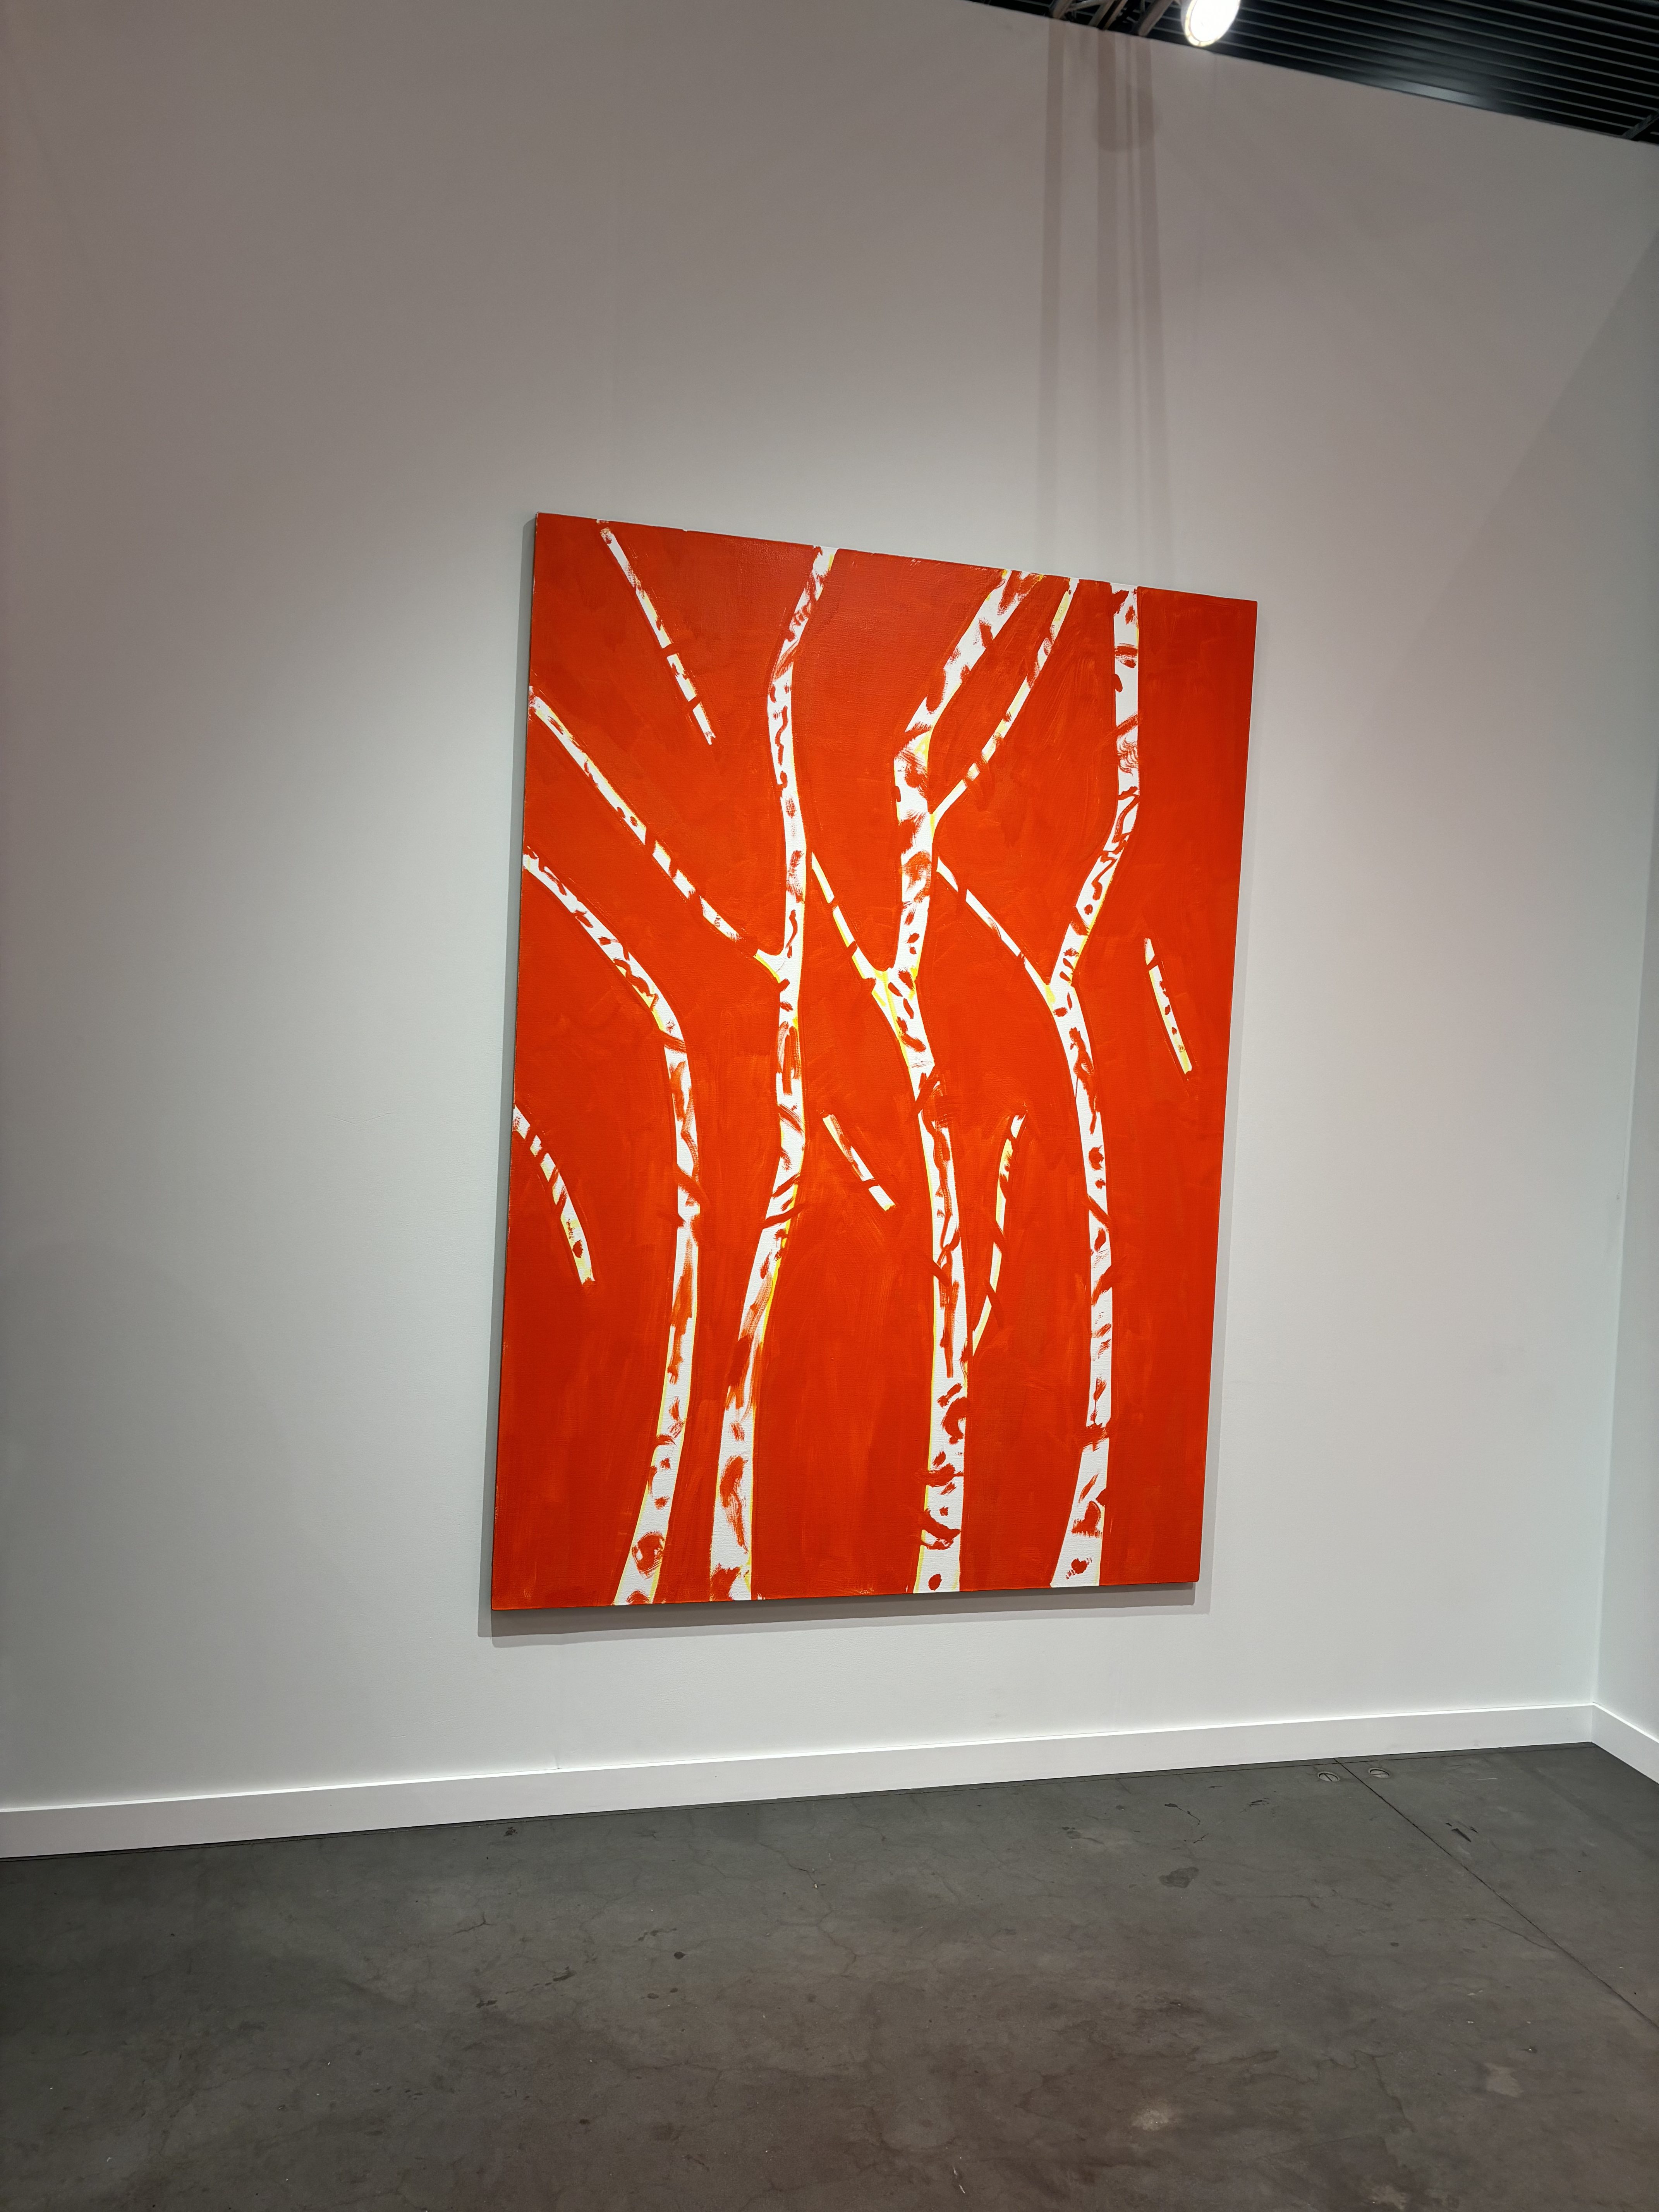 A painting of what looks like birch trees on a red baackground